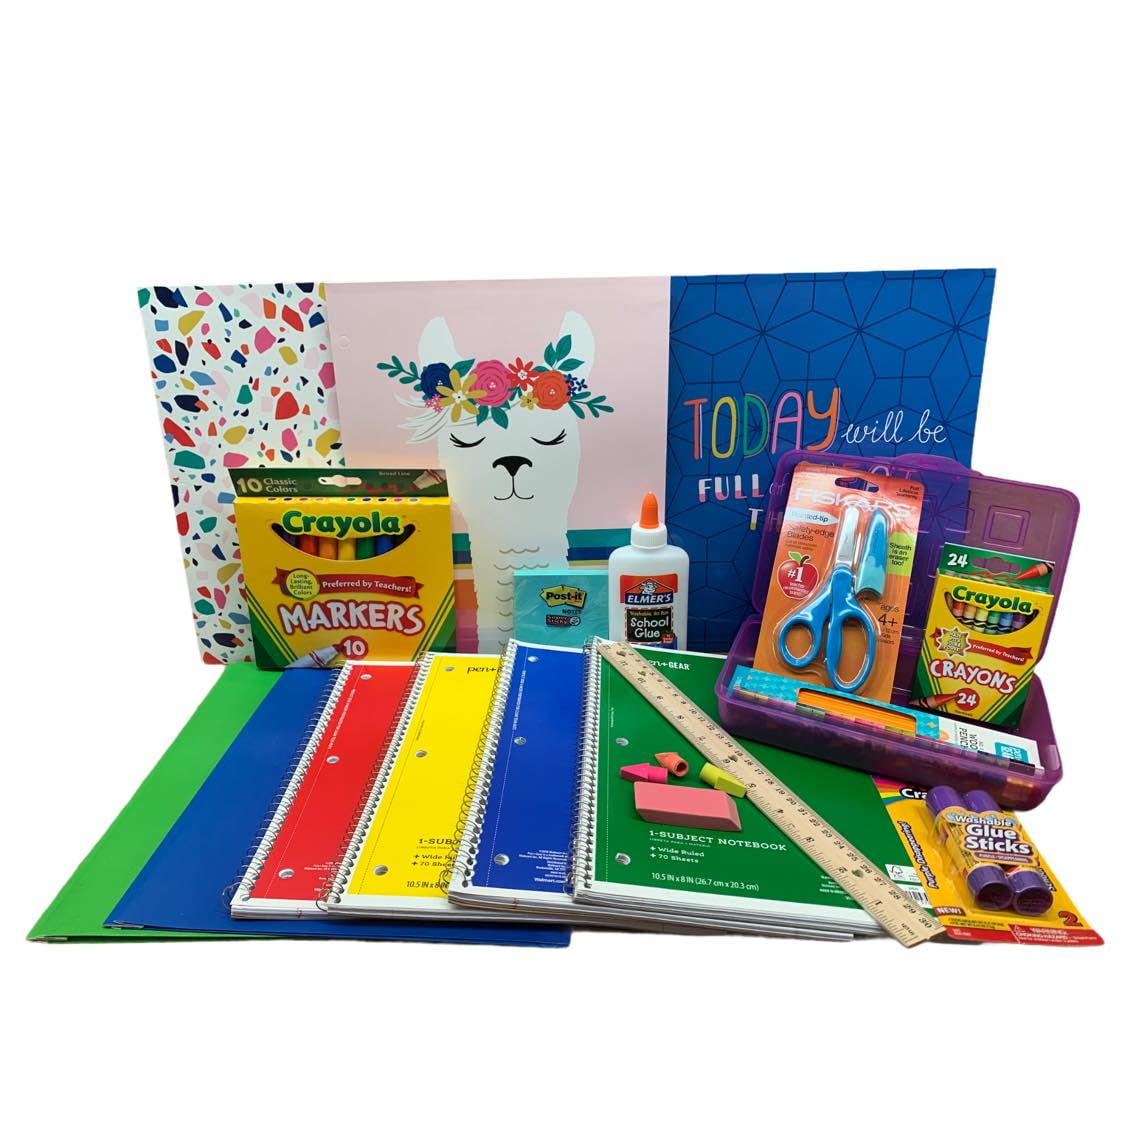 Daruoand DIY Art Craft Sets Craft Supplies Kits for Kids Toddlers